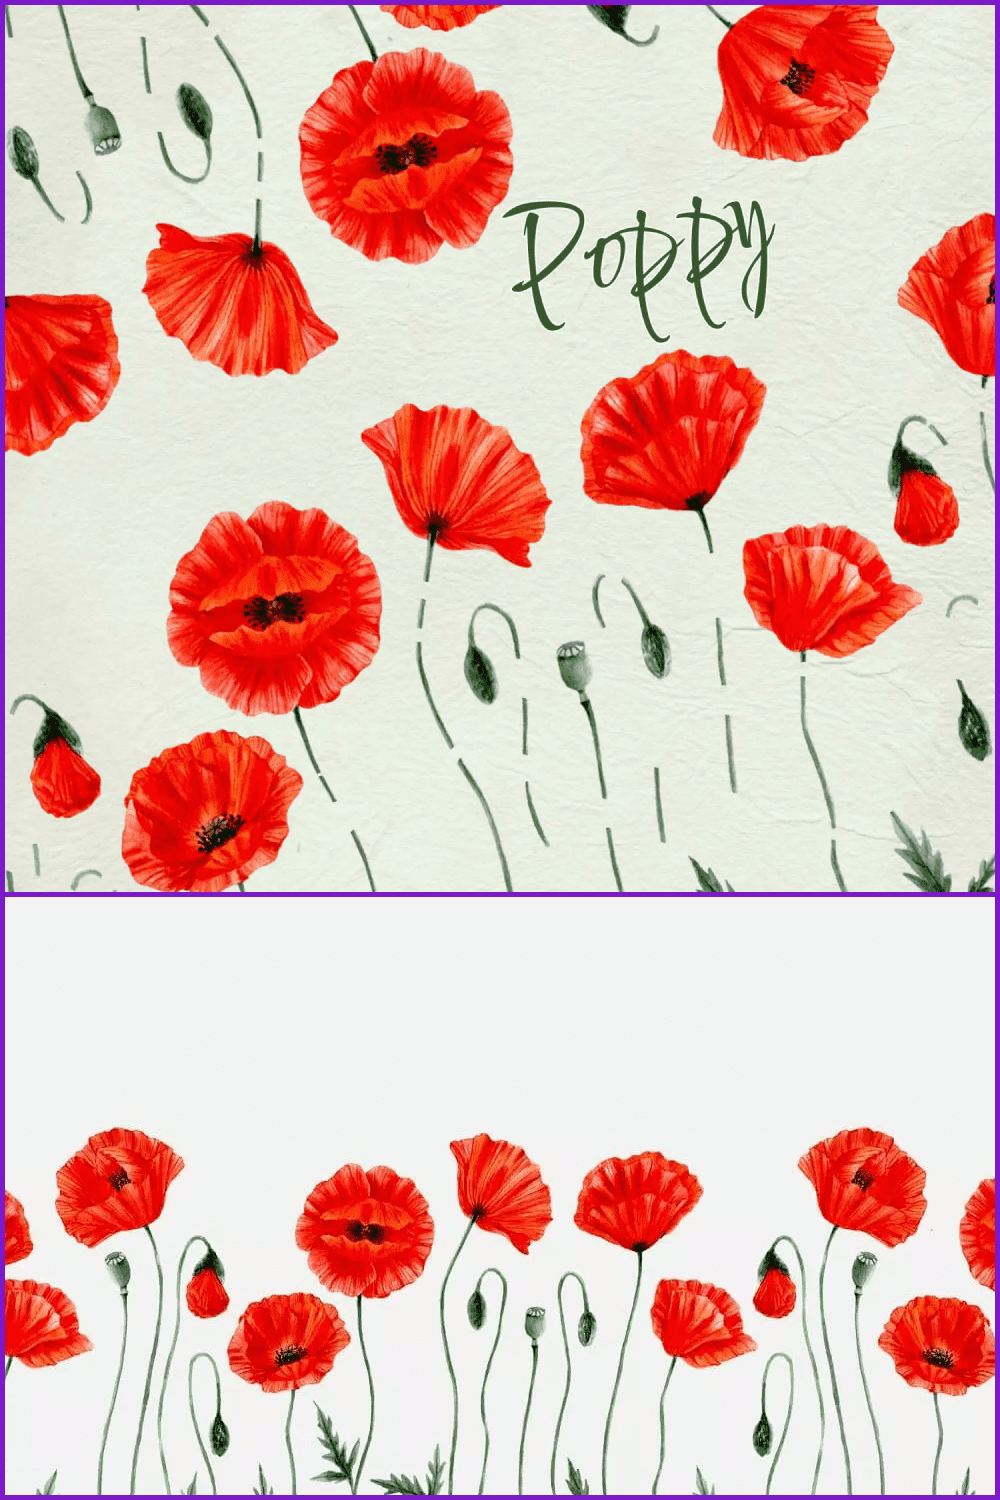 Red poppies in different forms.